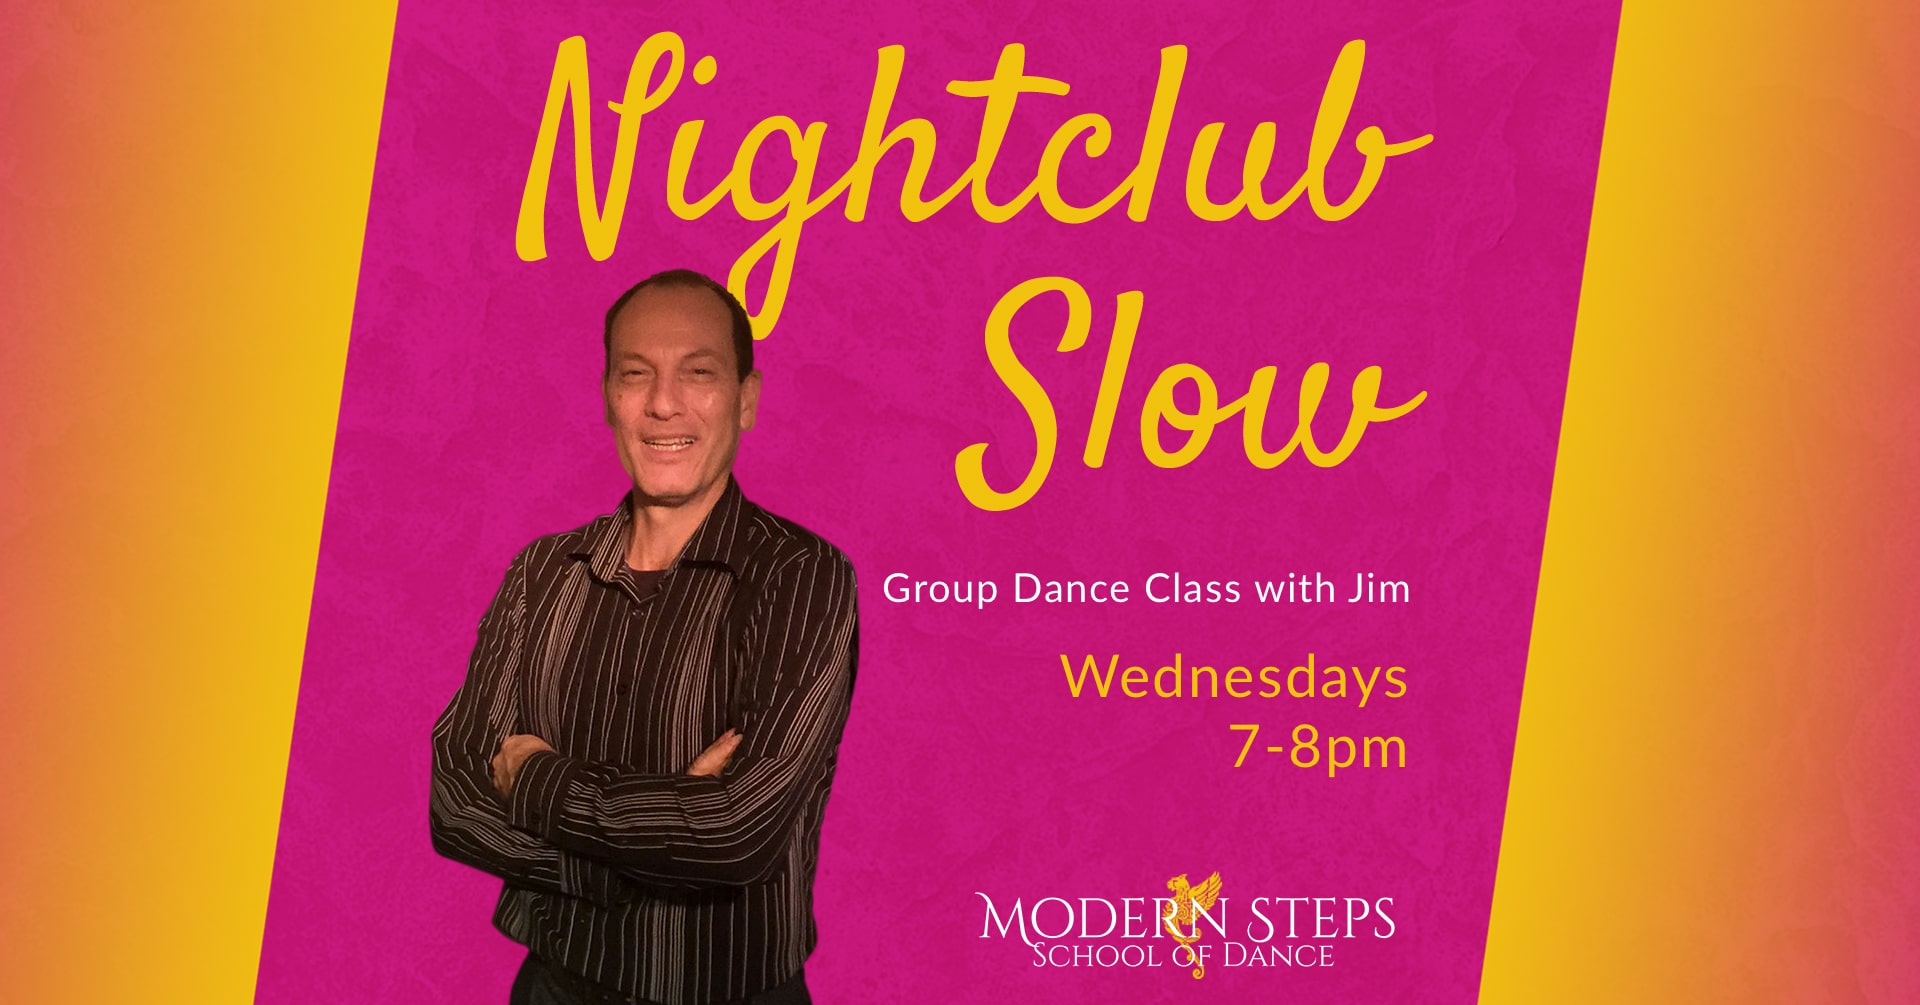 Nightclub Slow group dance classes with Jim at Modern Steps Dance Studio in Naples Florida - Naples Florida Things to Do